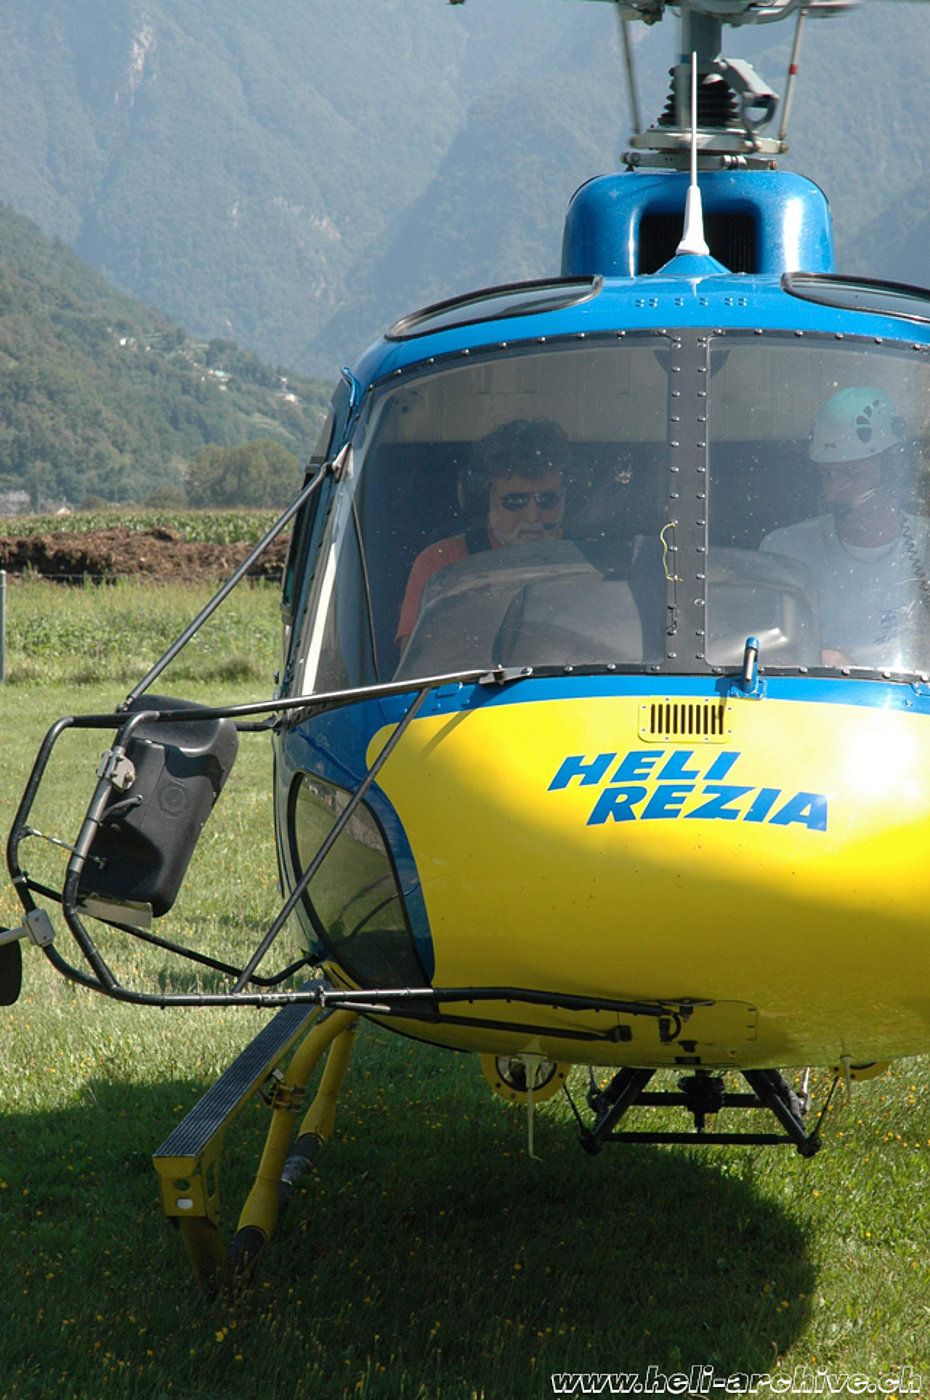 San Vittore/GR, August 2008 - Heinz von Wyl at the controls of the AS 350B3 Ecureuil HB-ZCM in service with Heli-Rezia (M. Bazzani)